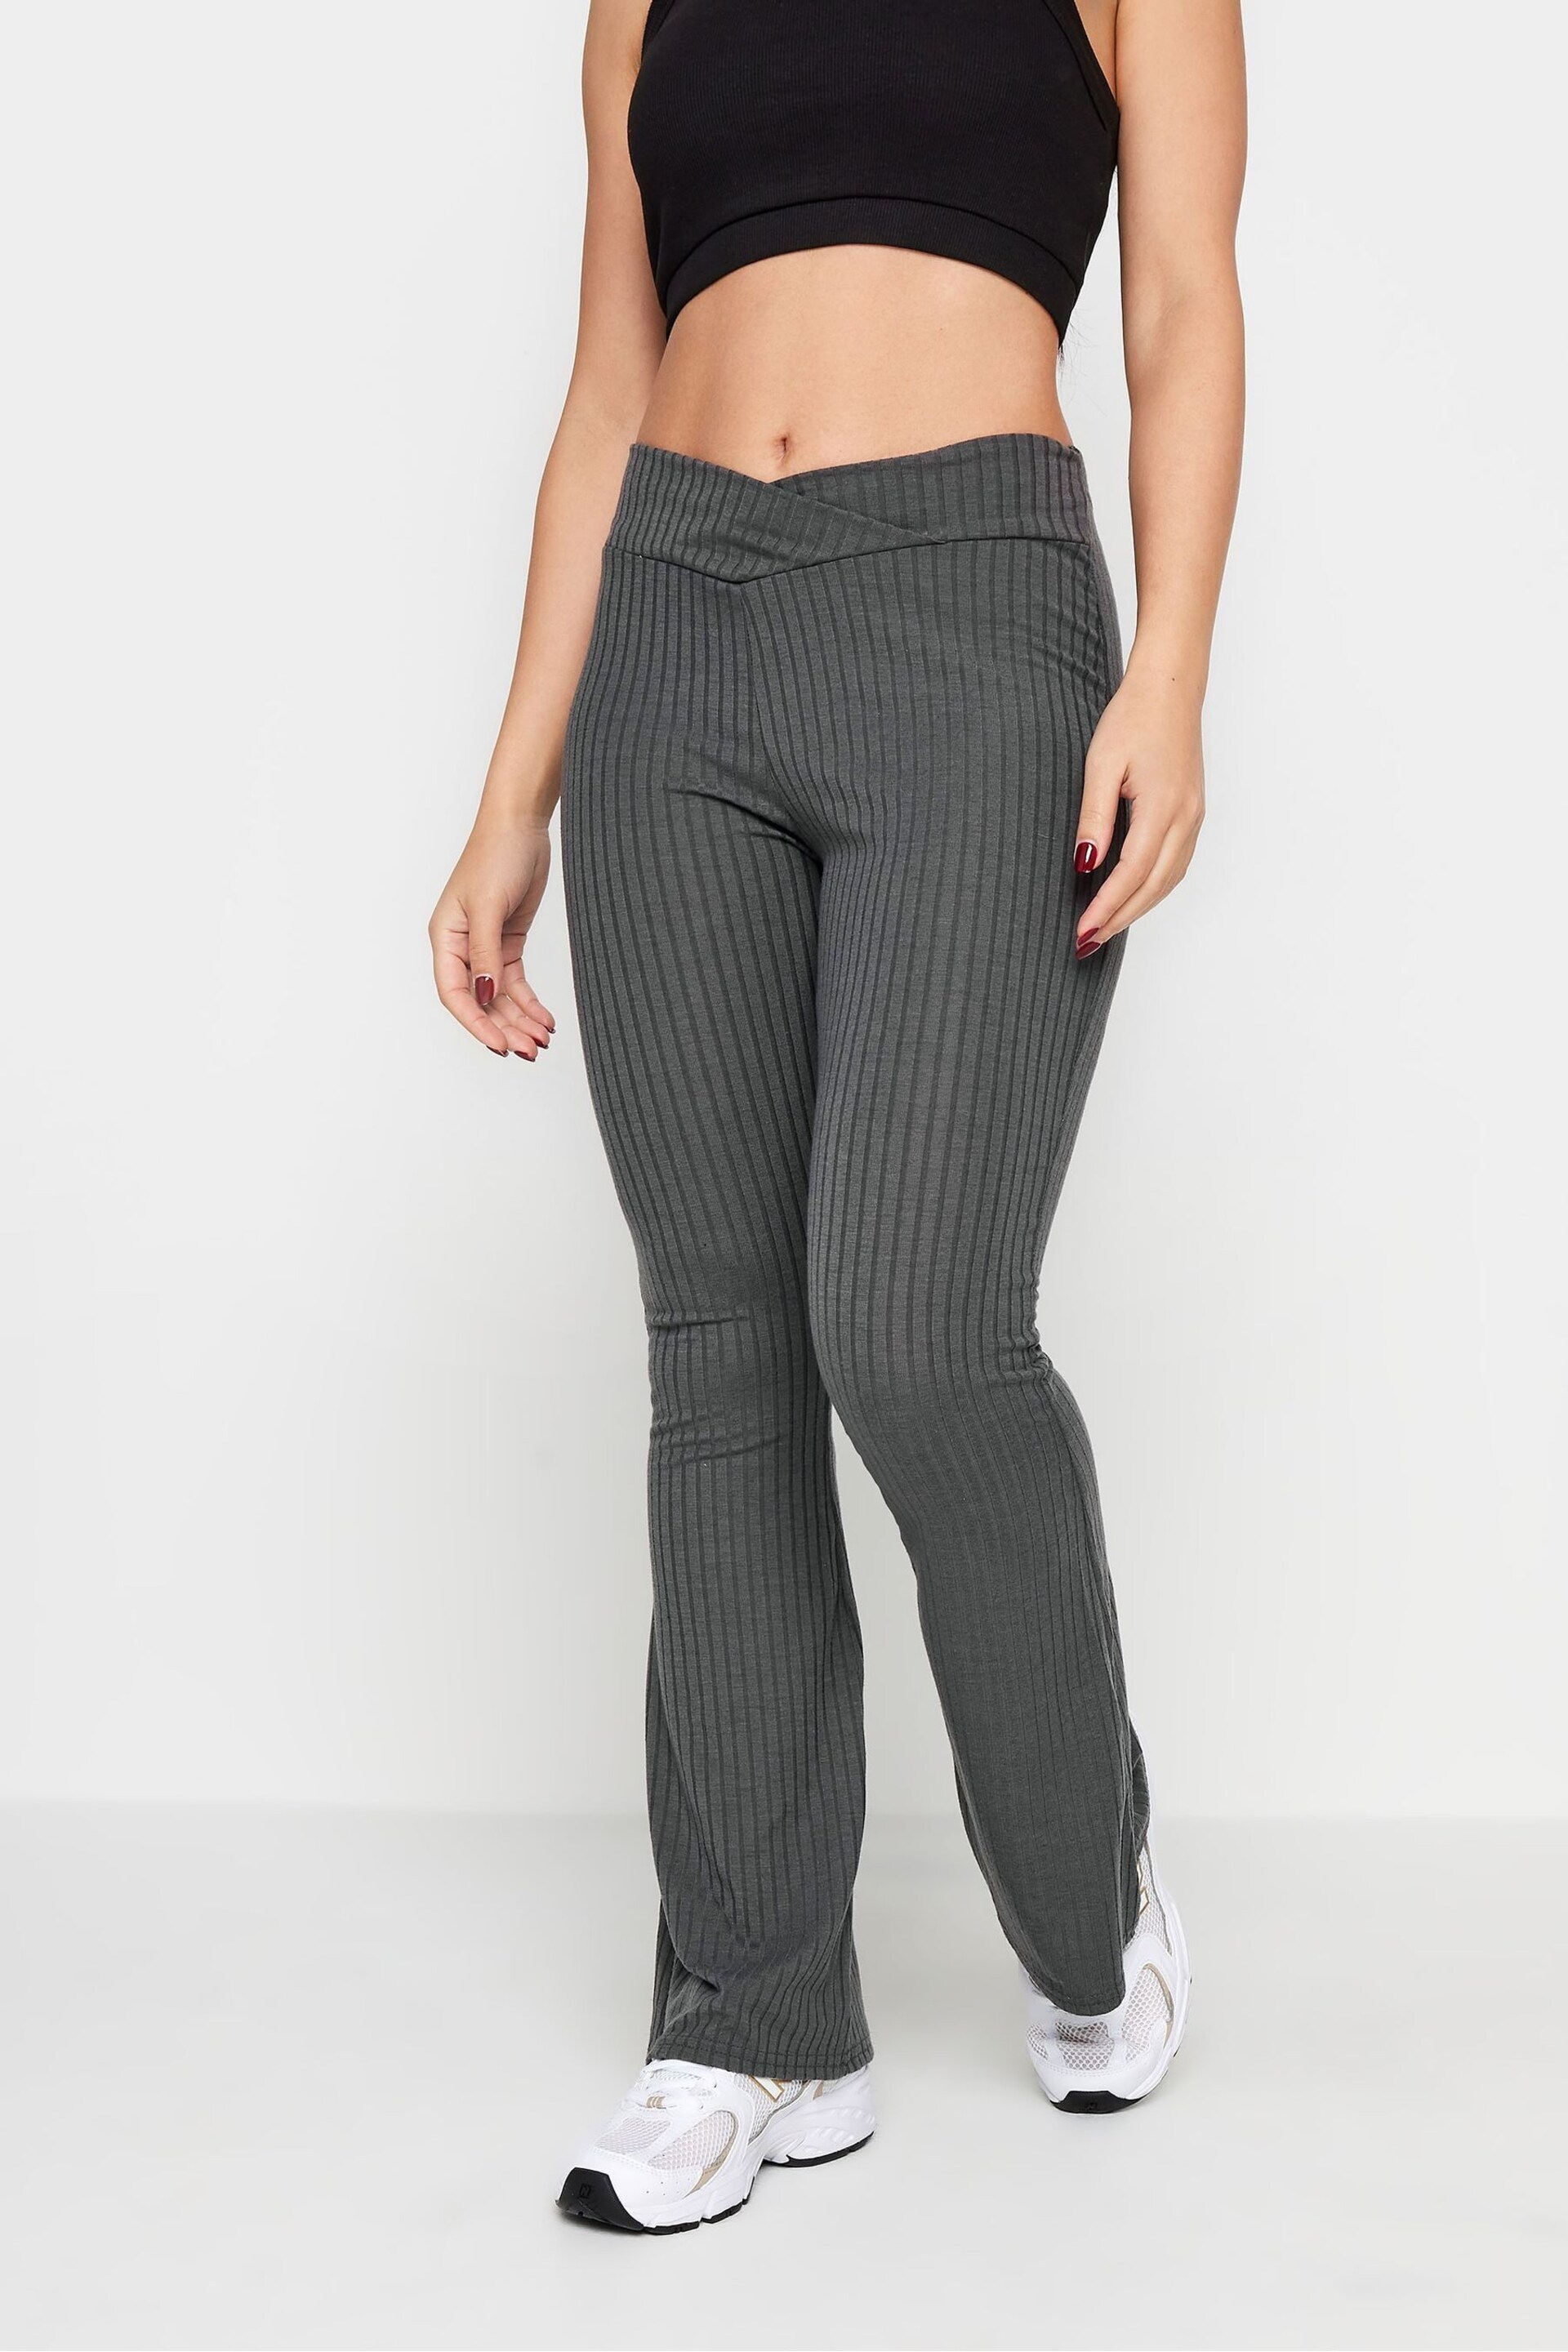 PixieGirl Petite Grey V-Front Ribbed Flare Trousers - Image 1 of 5